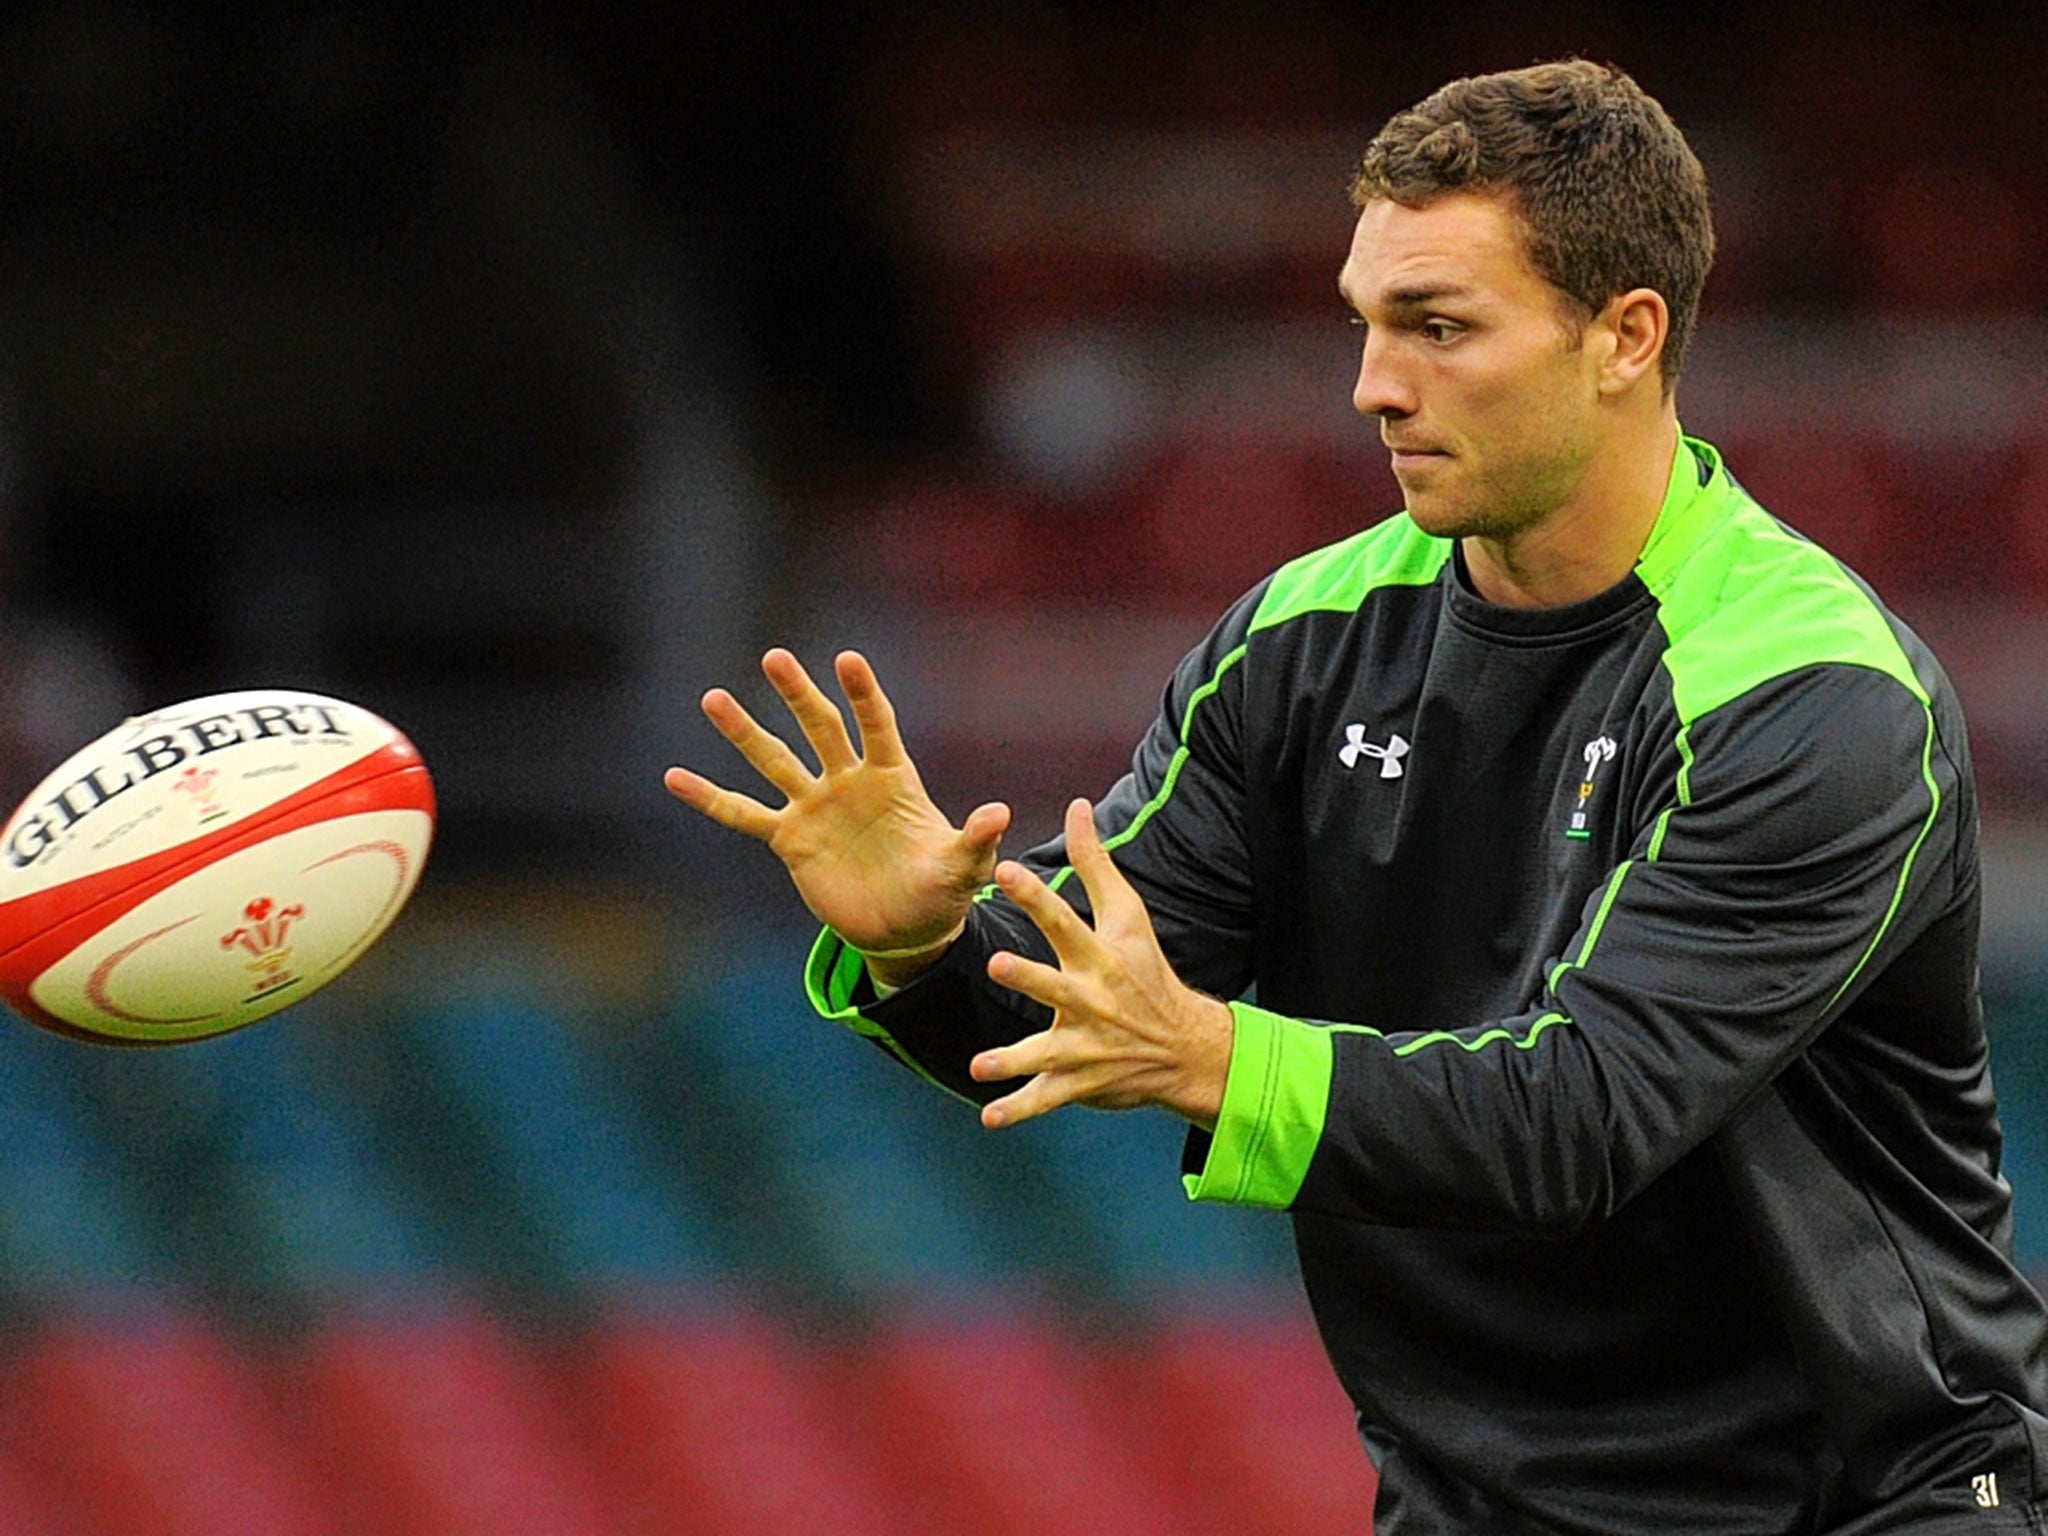 George North playing at centre is the key experiment in terms of team selection for Wales tomorrow